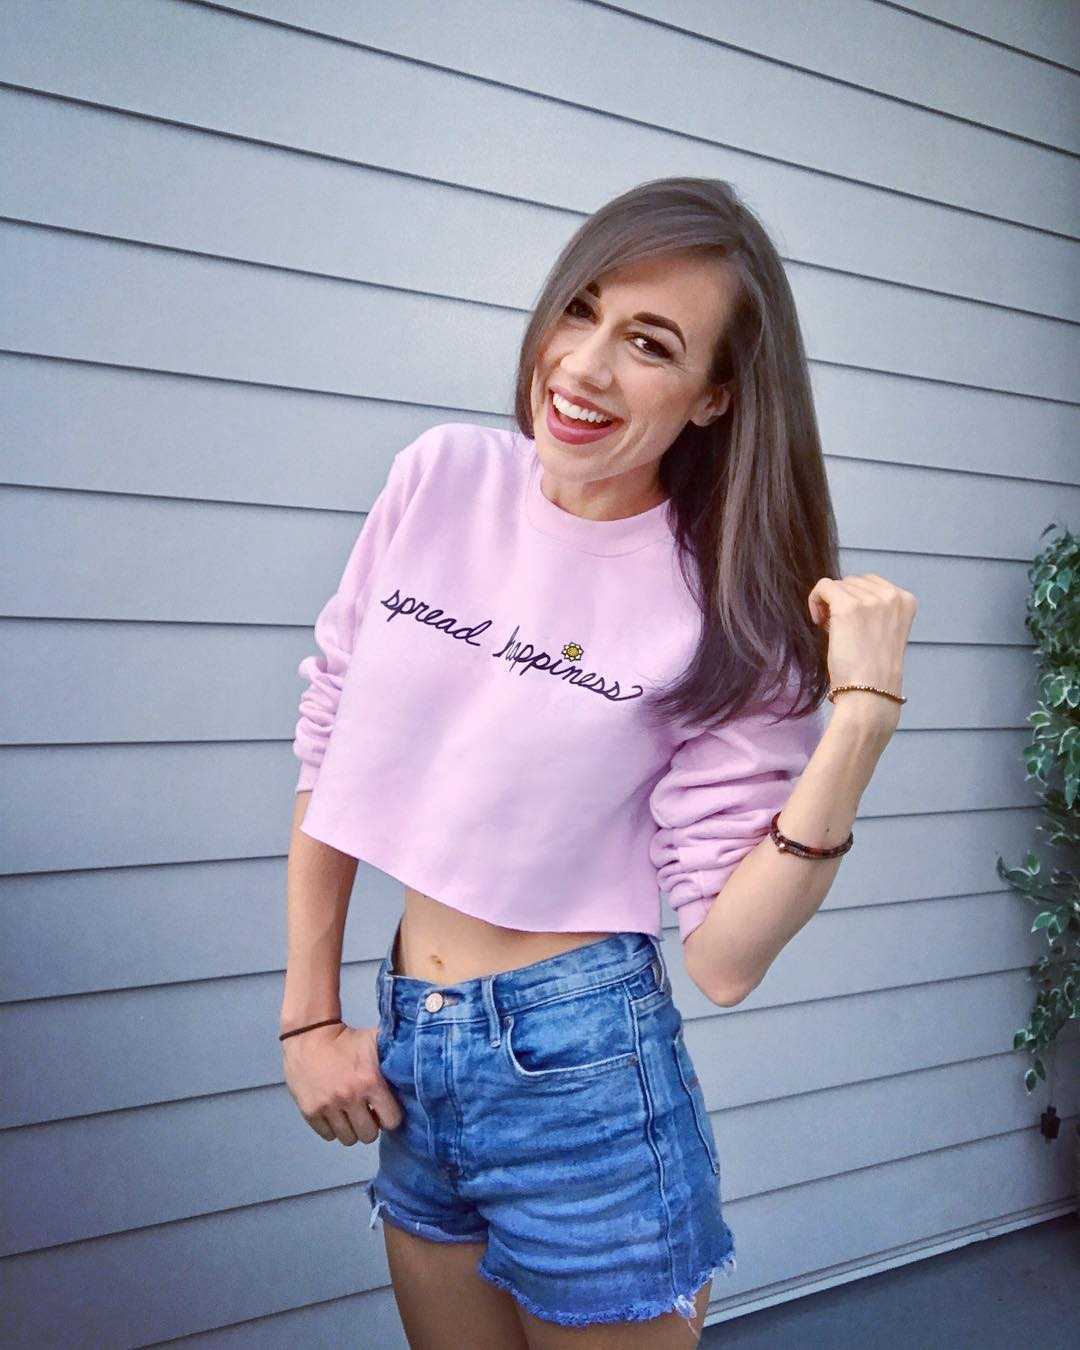 51 Hottest Colleen Ballinger Big Butt Pictures That Will Make You Begin To Look All Starry Eyed At Her 30